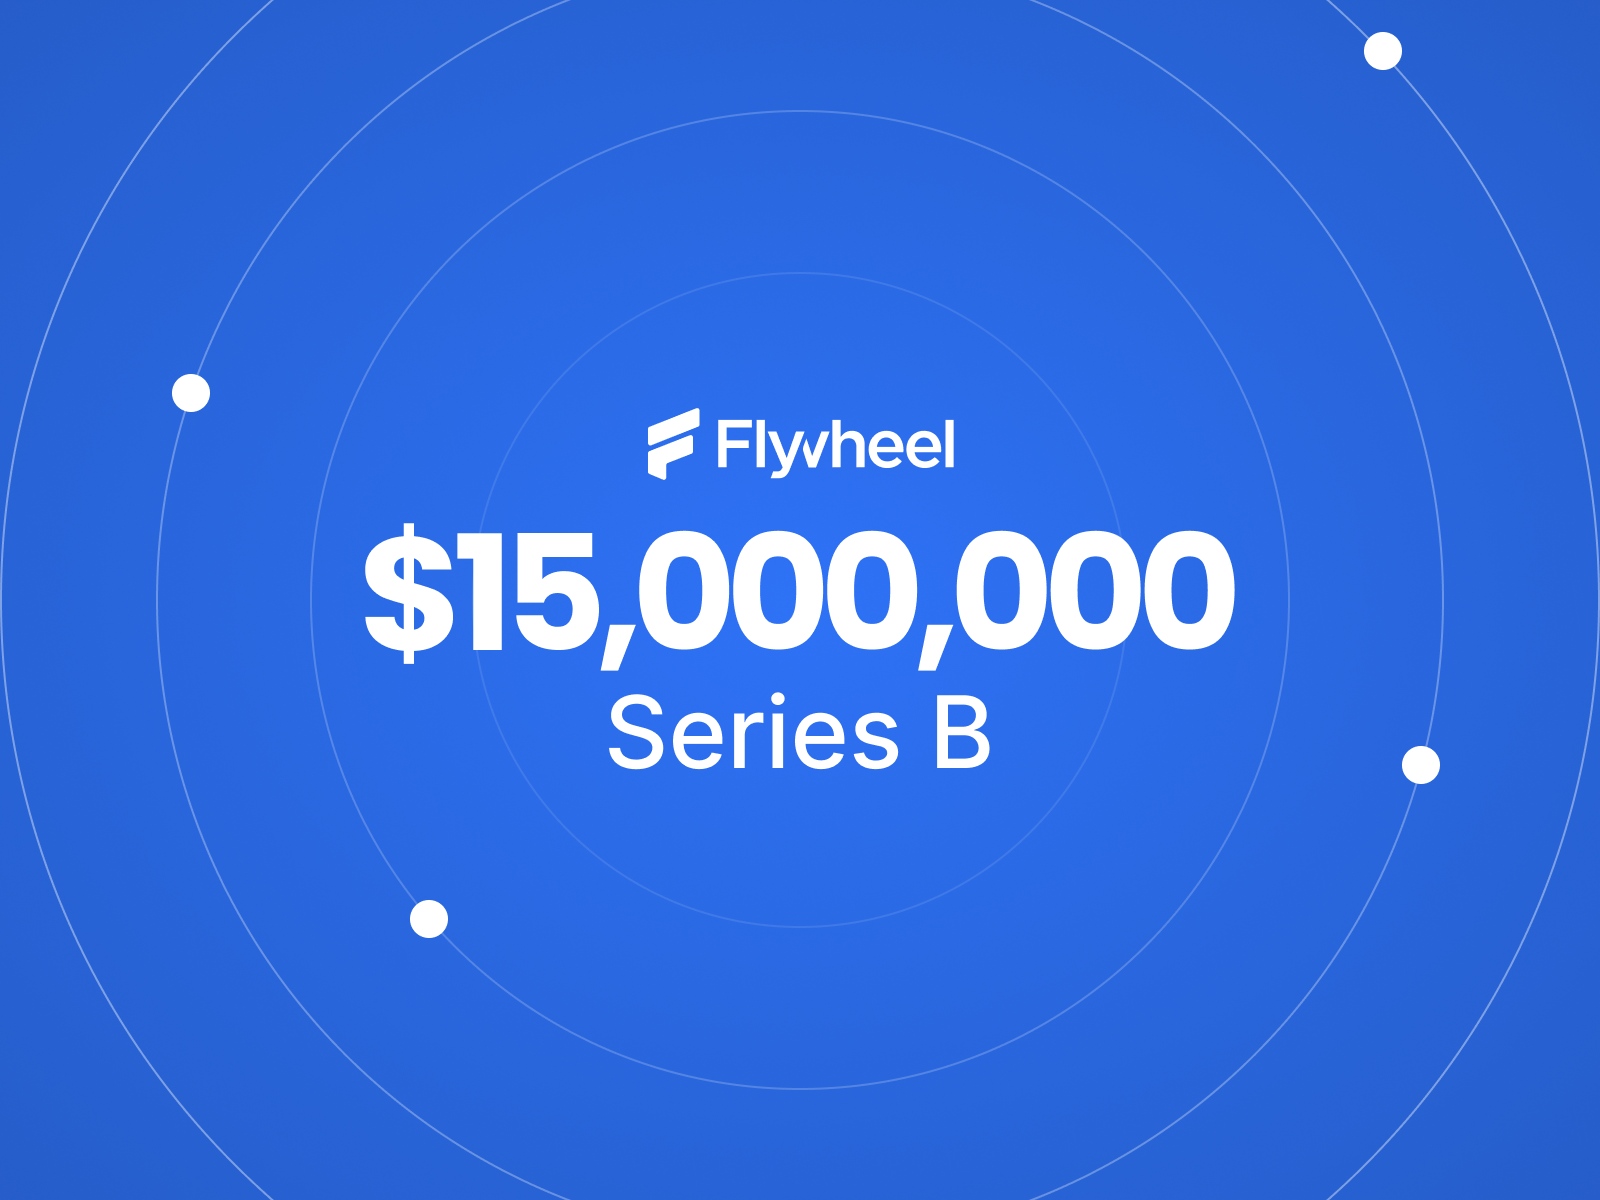 The number 15 million with the Flywheel logo and text "Series B" with concentric dots around it.